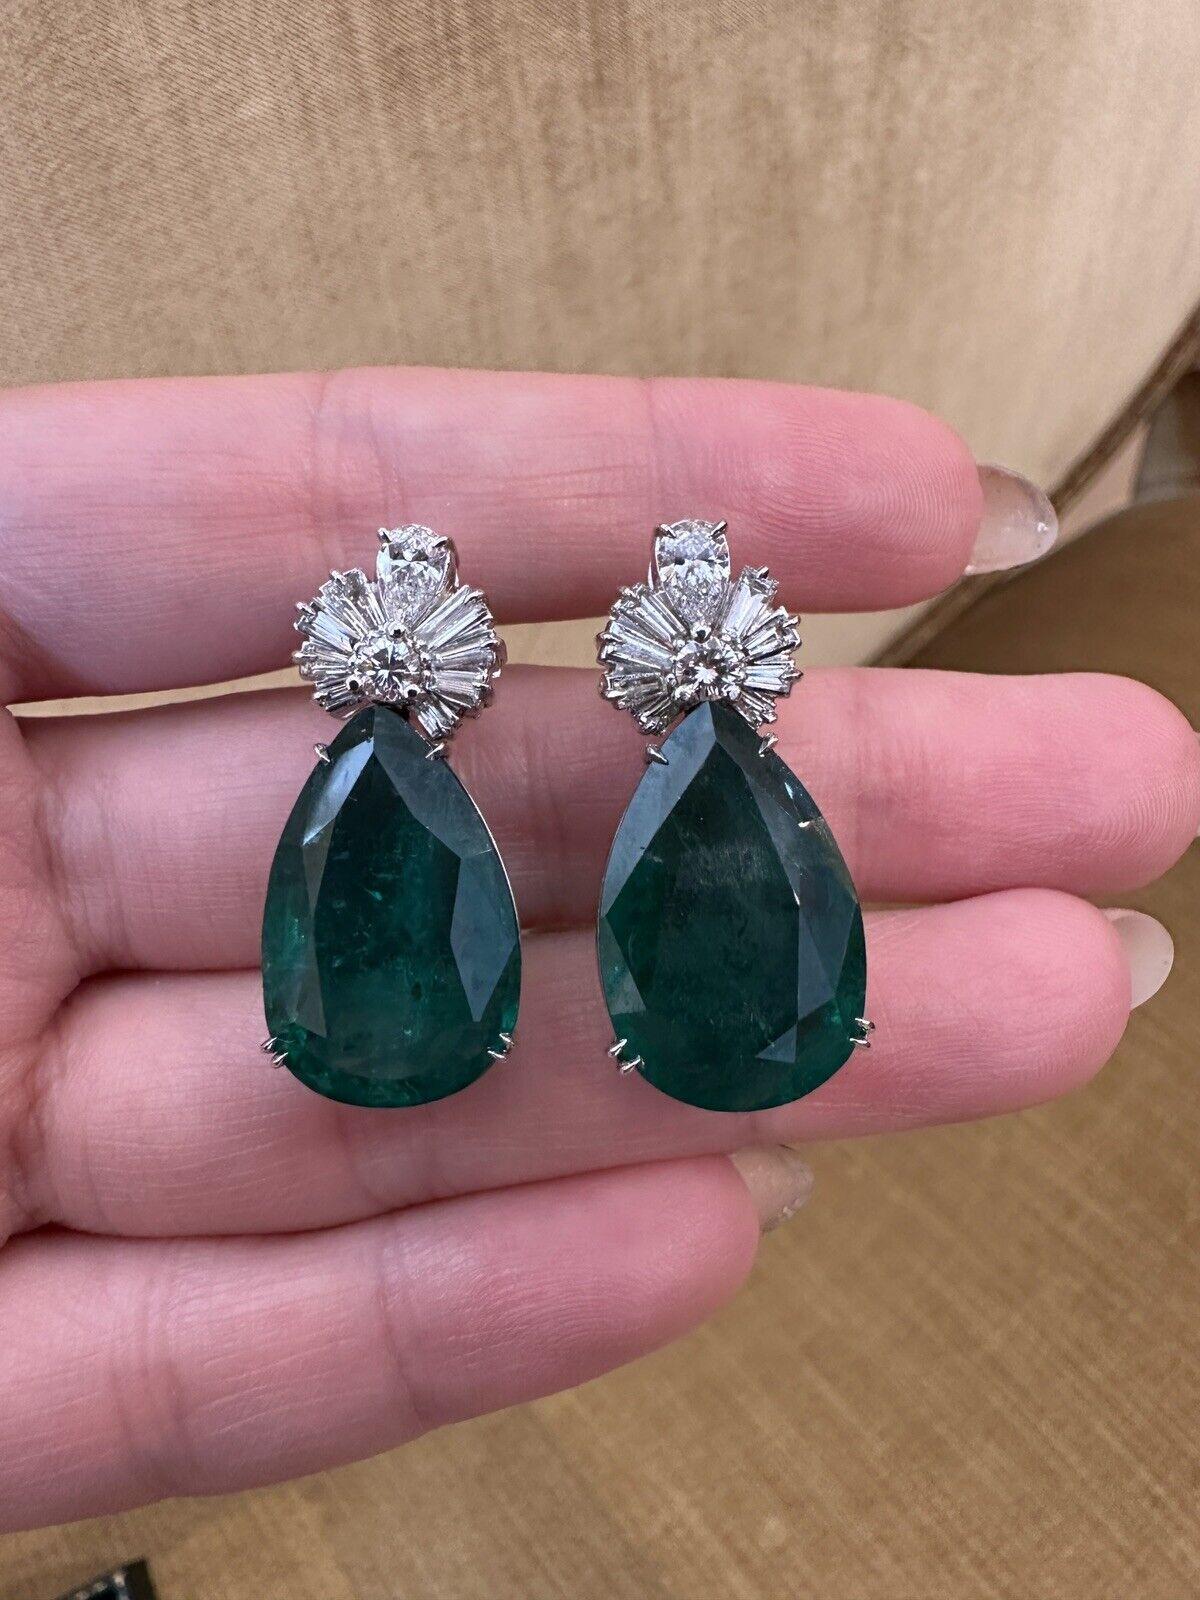 GIA Certified 31.17 carats Pear shape Emeralds and Diamond Earrings in 18k White Gold

Large Emerald and Diamond Drop Earrings feature Natural Pear shaped Emeralds with Round, Baguette, and Pear Diamonds at the top of each Emerald set in Platinum.